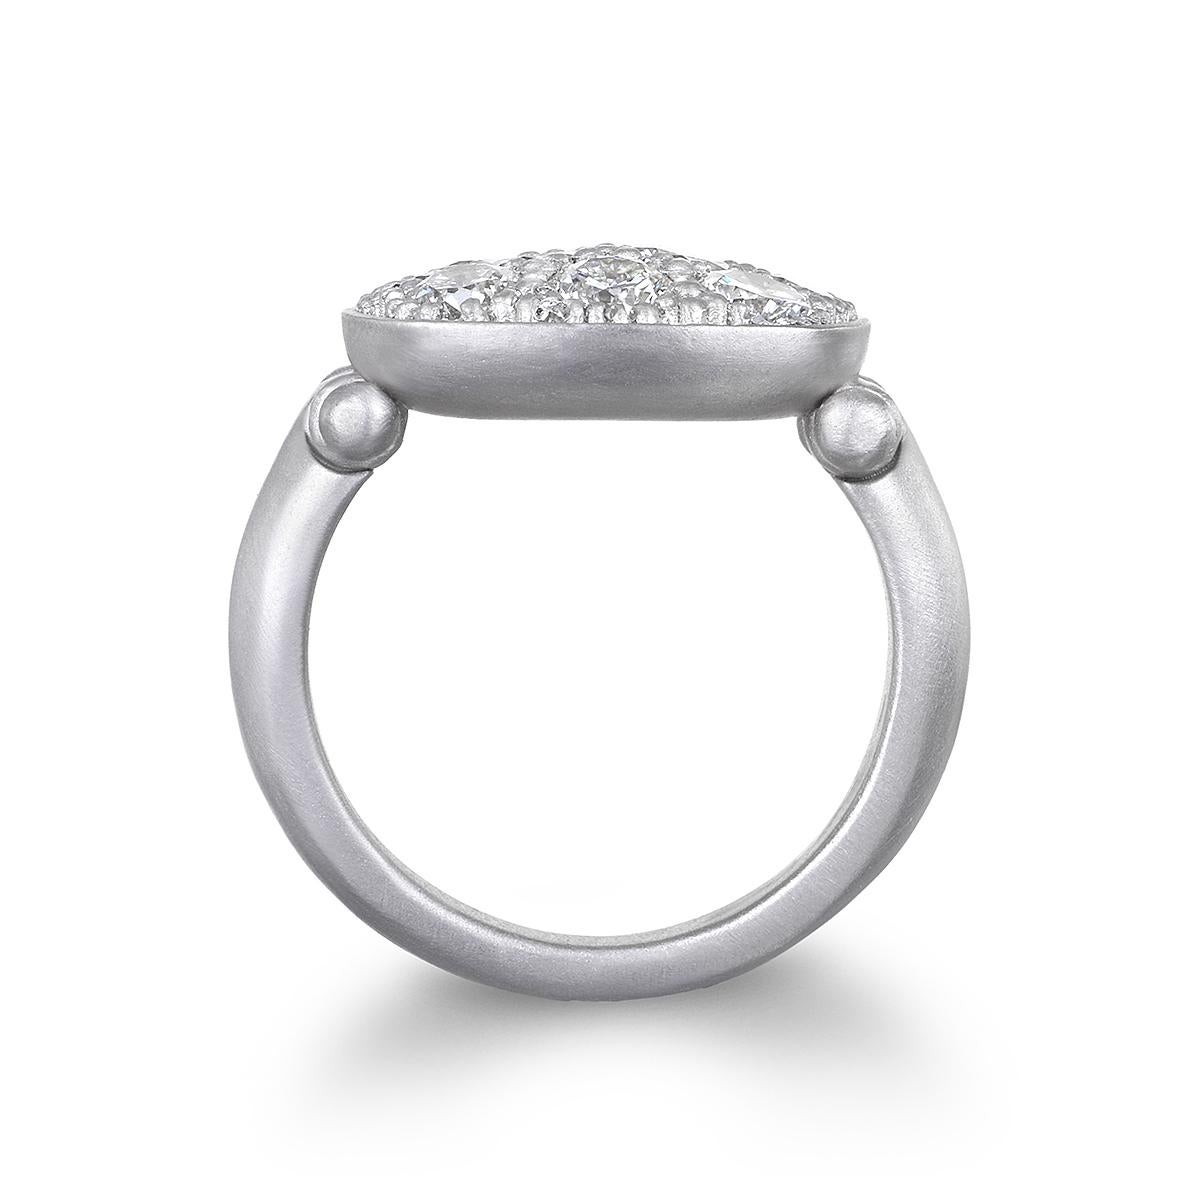 A modern-day take on the Signet Ring, Faye Kim's Platinum Diamond Hinged Chiclet Ring sparkles with bright, white pave diamonds. With its flattering chiclet or antique cushion shape, it's a great look worn on any finger and can be stacked with other